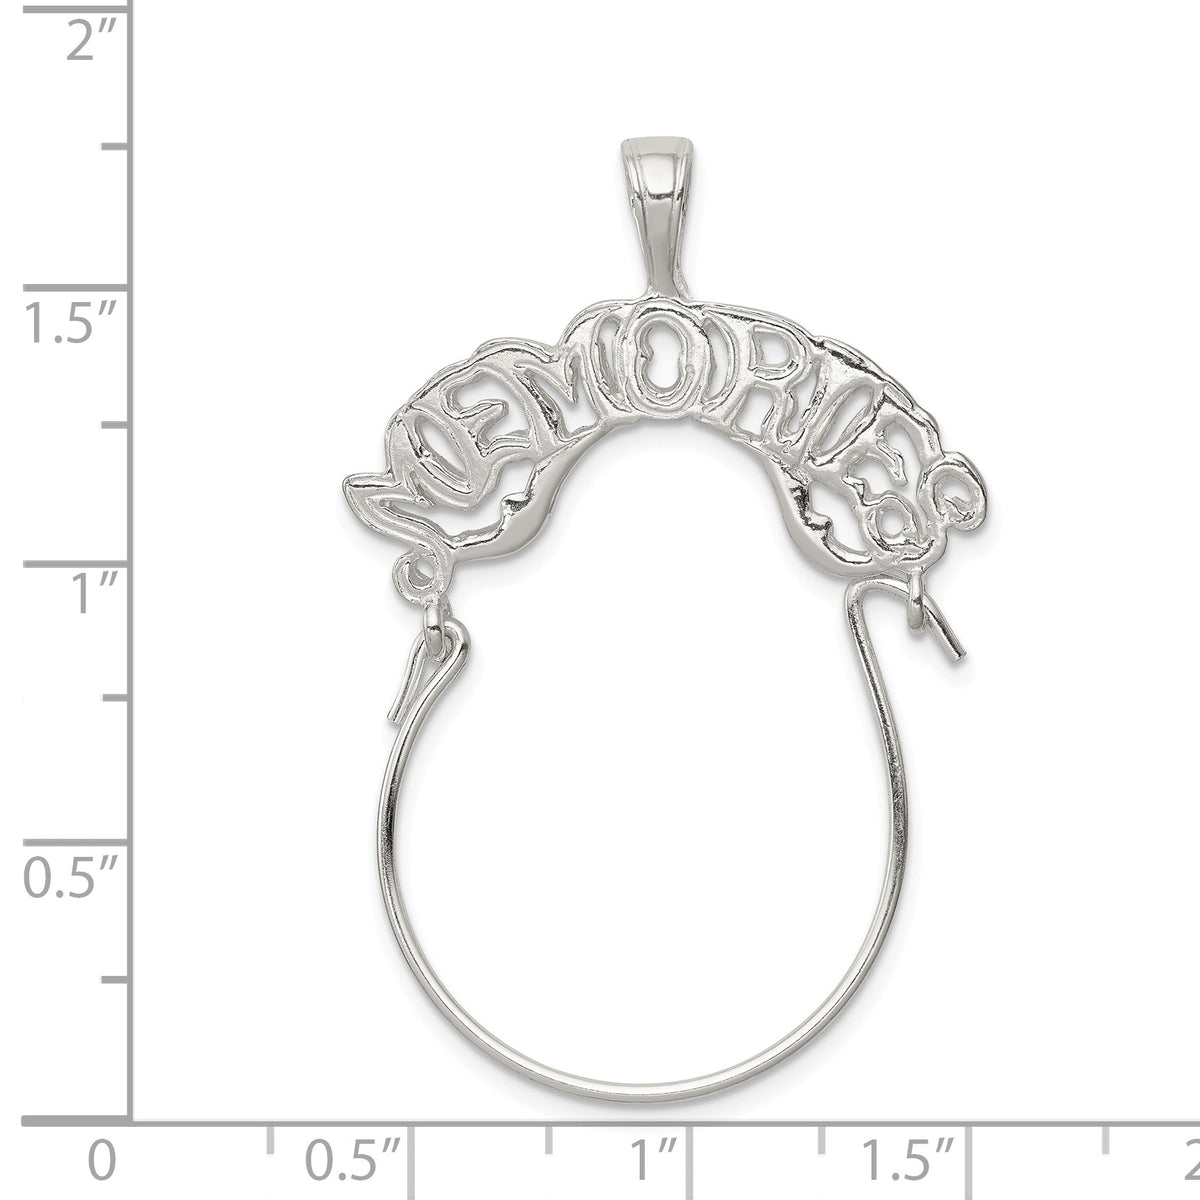 Alternate view of the Sterling Silver Memories Charm Holder Pendant by The Black Bow Jewelry Co.